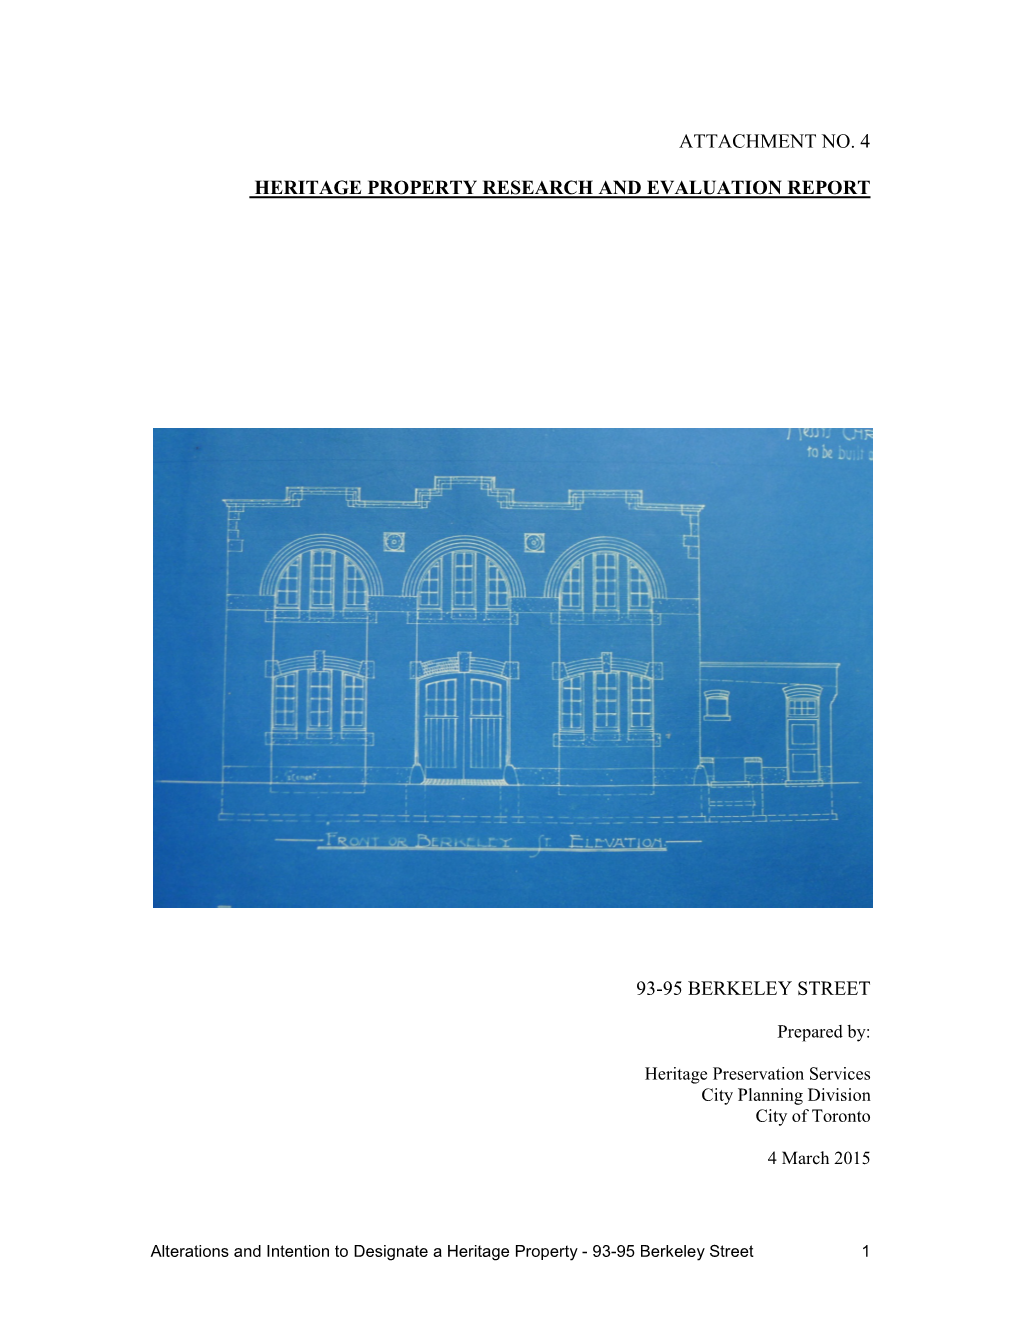 Attachment No. 4 Heritage Property Research And